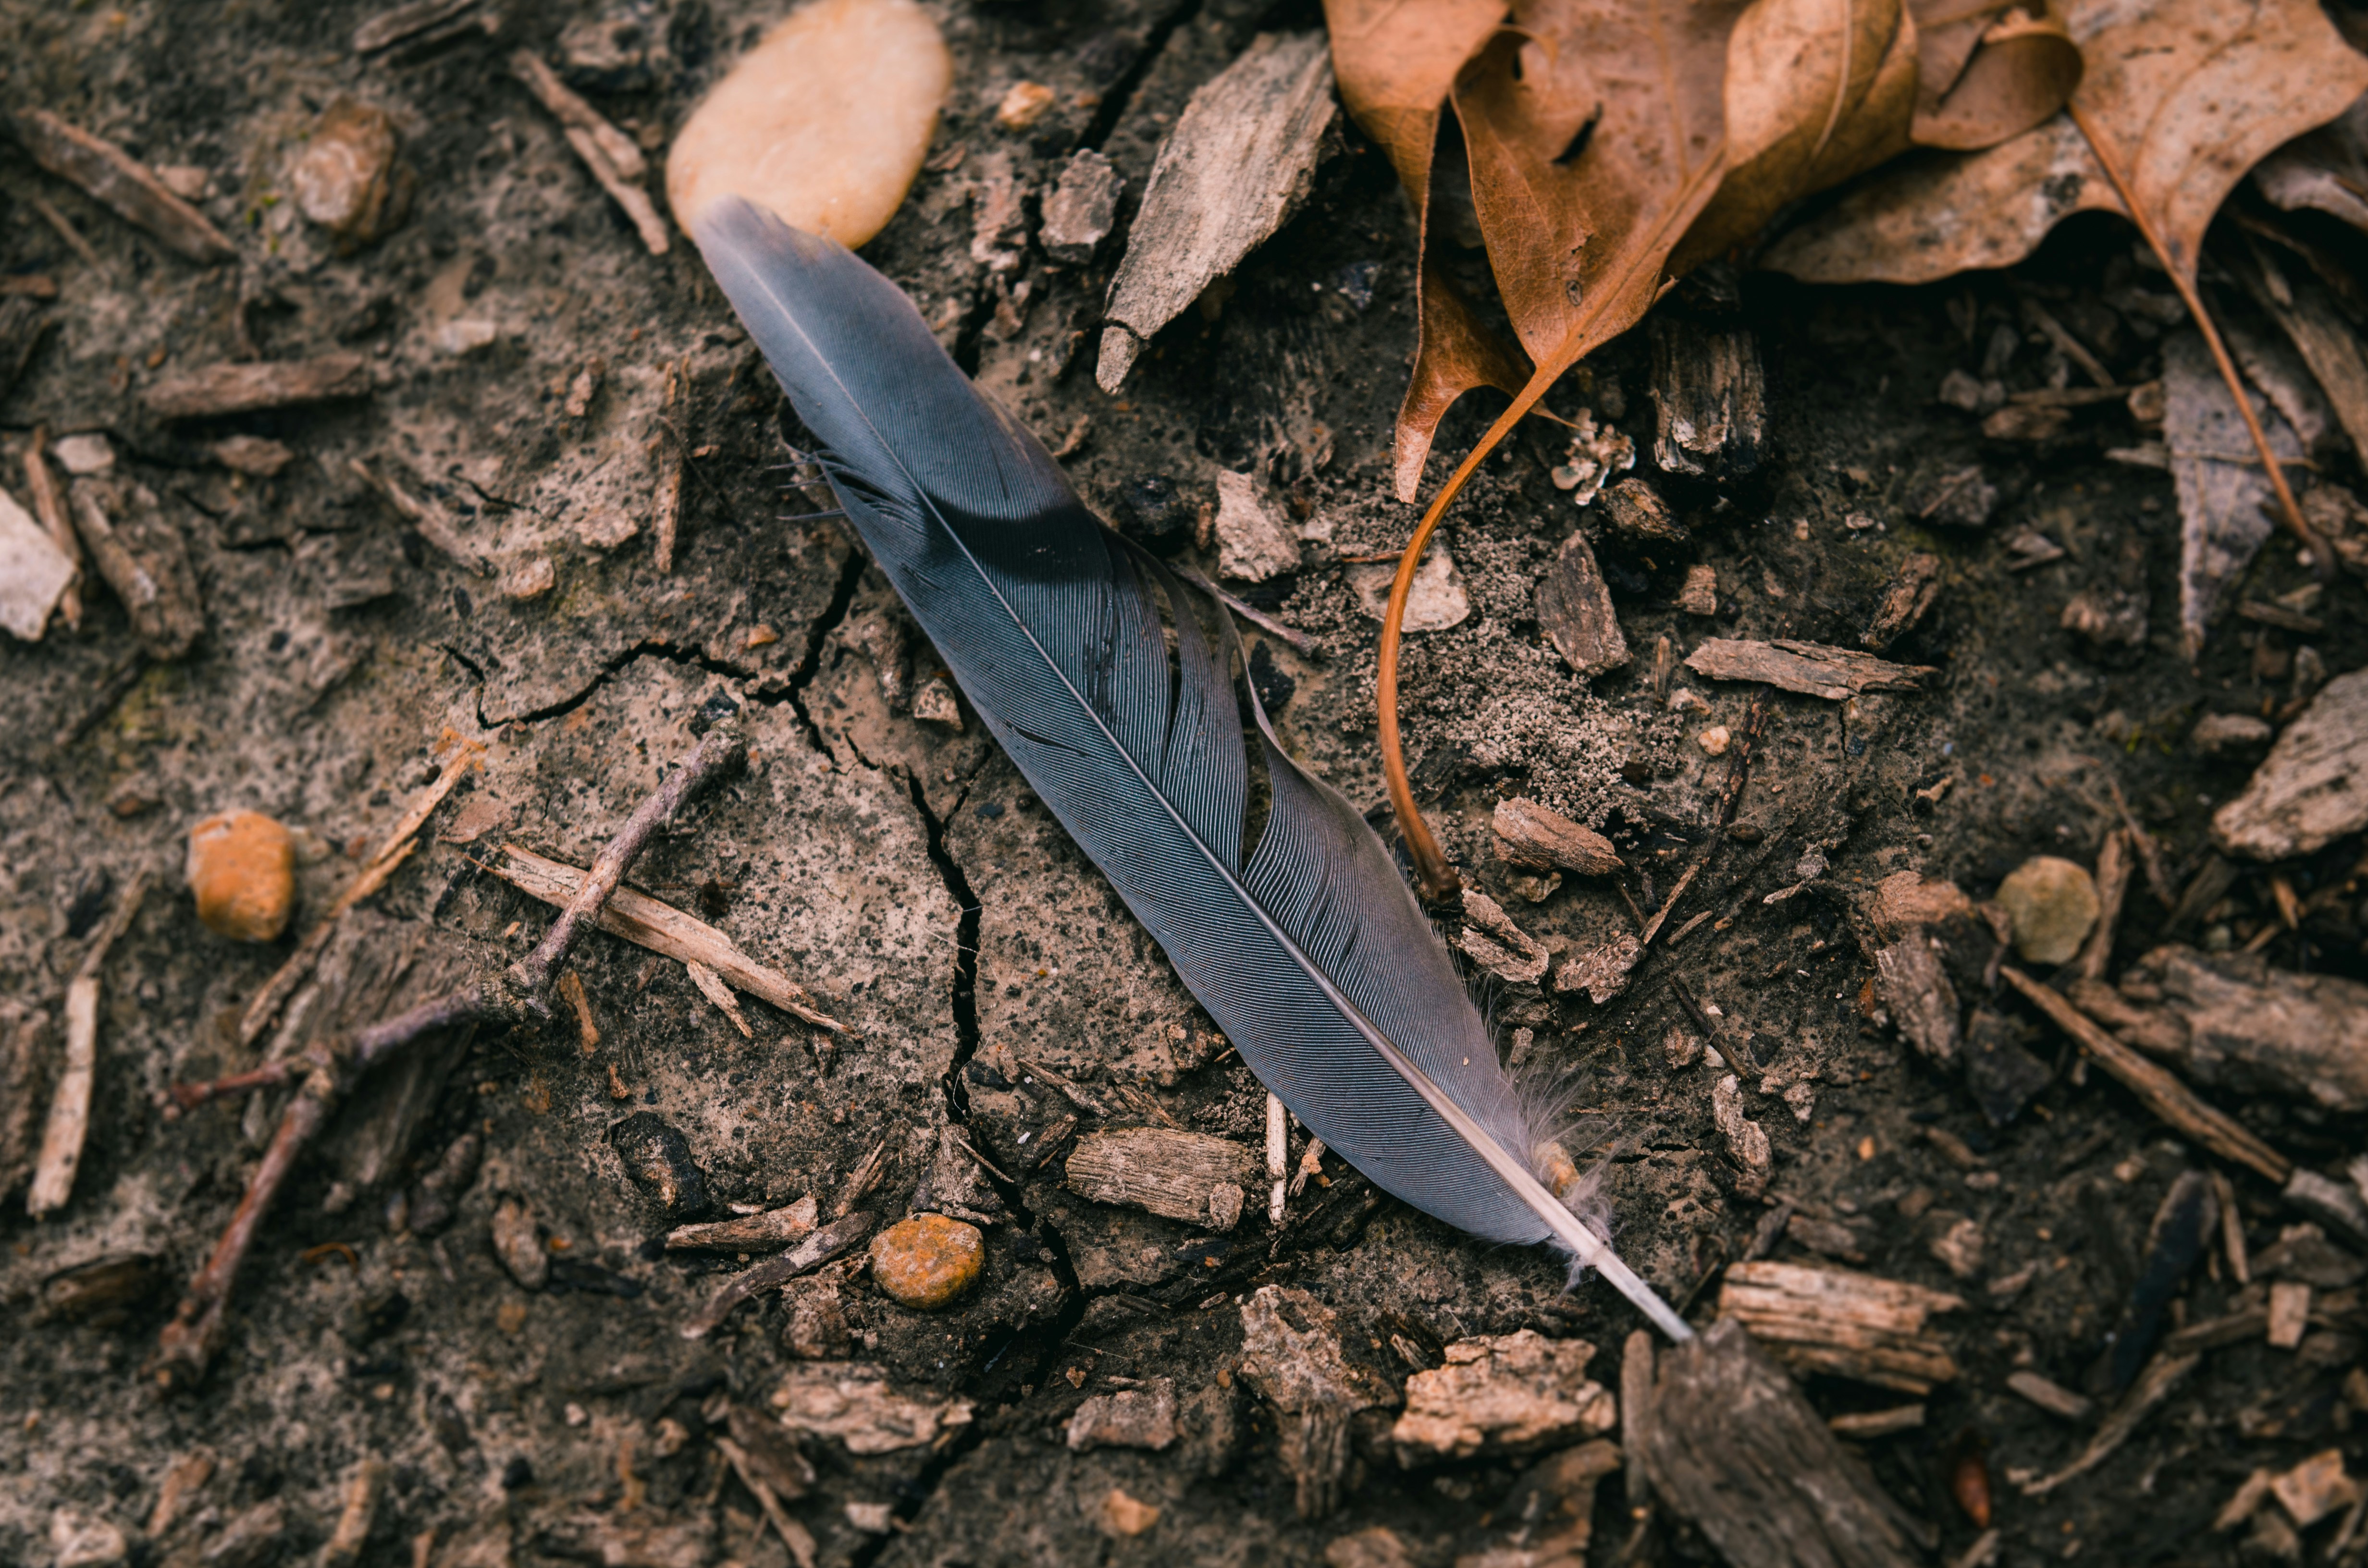 Photo of a black bird feather resting on cracked dirt ground, surrounded by rocks, twigs and leaves.